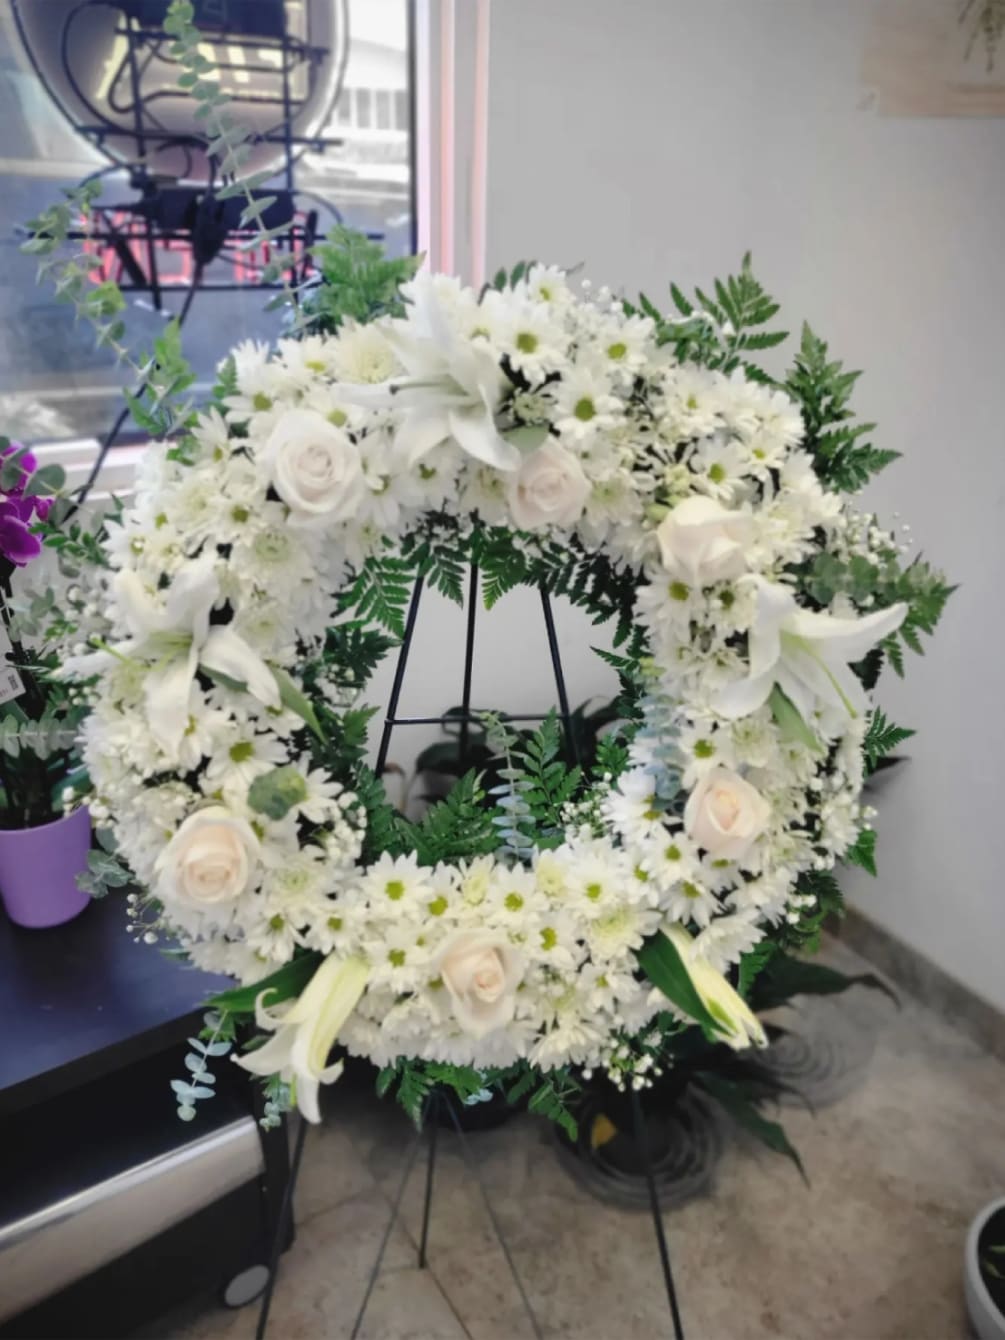 A beautiful white and green tribute wreath that calms, this easel arrangement